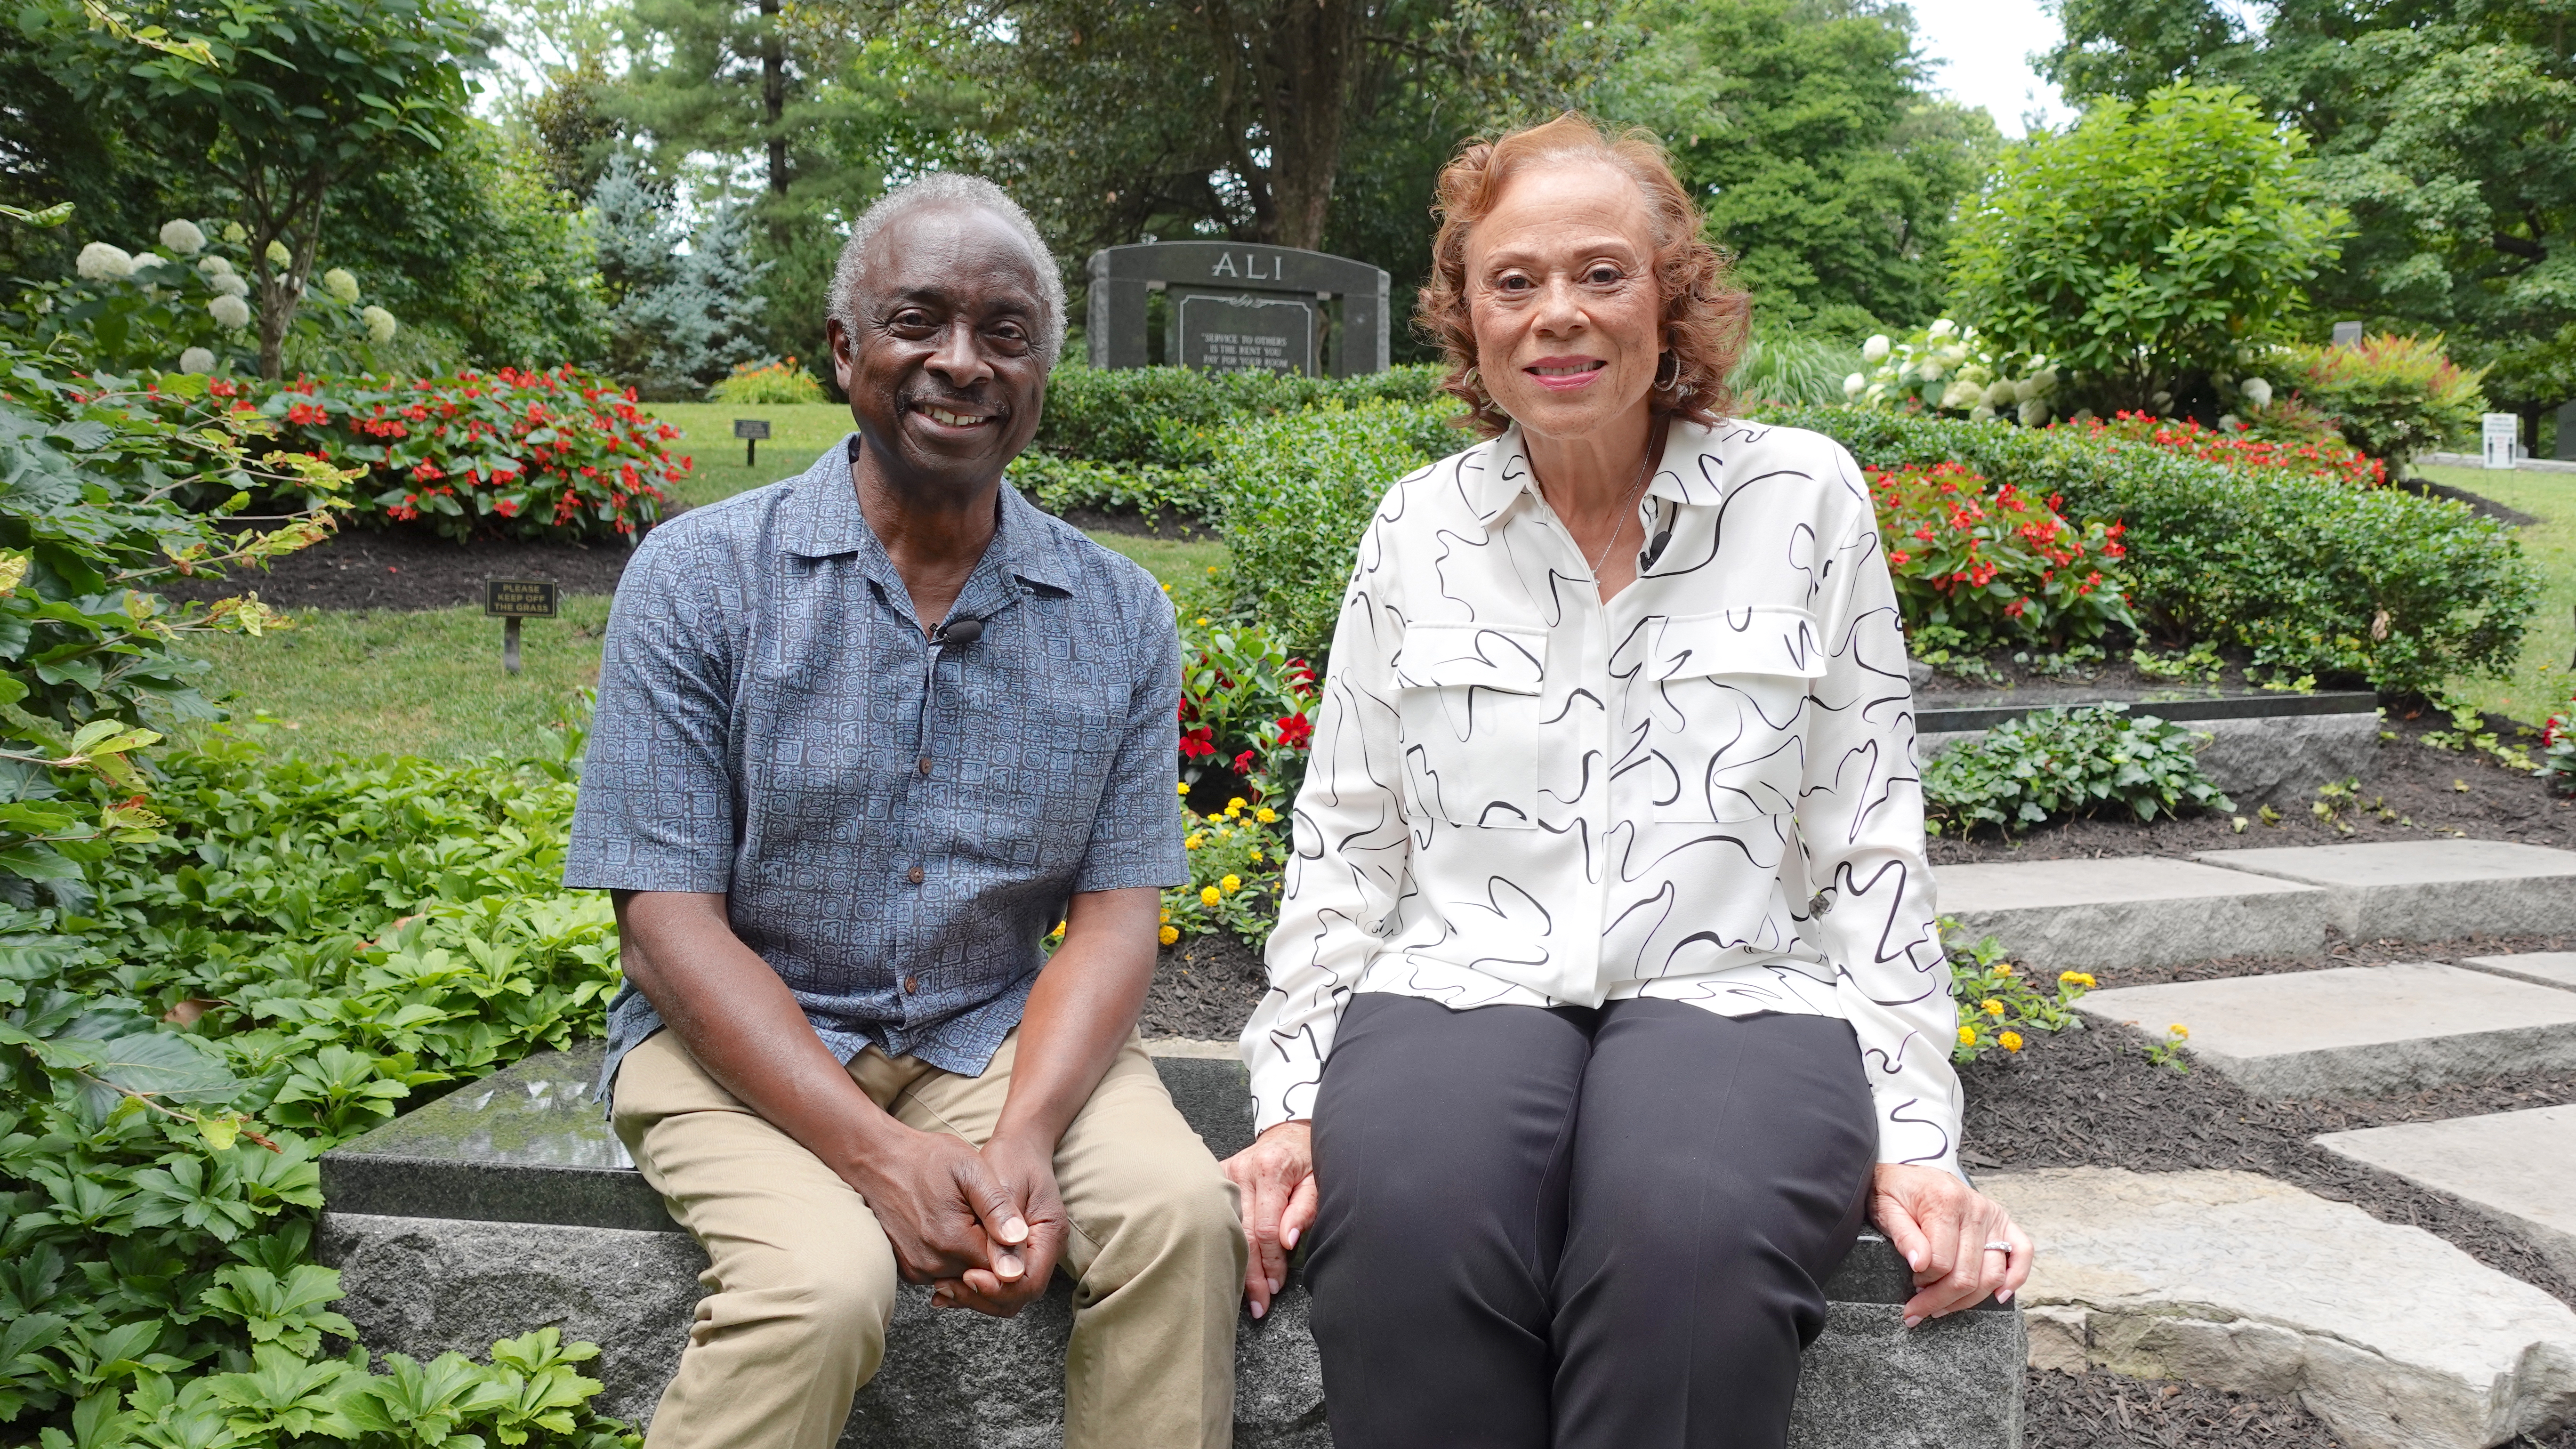 For “World’s Greatest Cemeteries” public television series: Host/Producer Roberto Mighty, with Mrs. Lonnie Ali, widow of Muhammad Ali, at Cave Hill Cemetery in Louisville, KY. Season 2-episode WCEM_201_Cave Hill Cemetery. Photo by Celestial Media LLC
